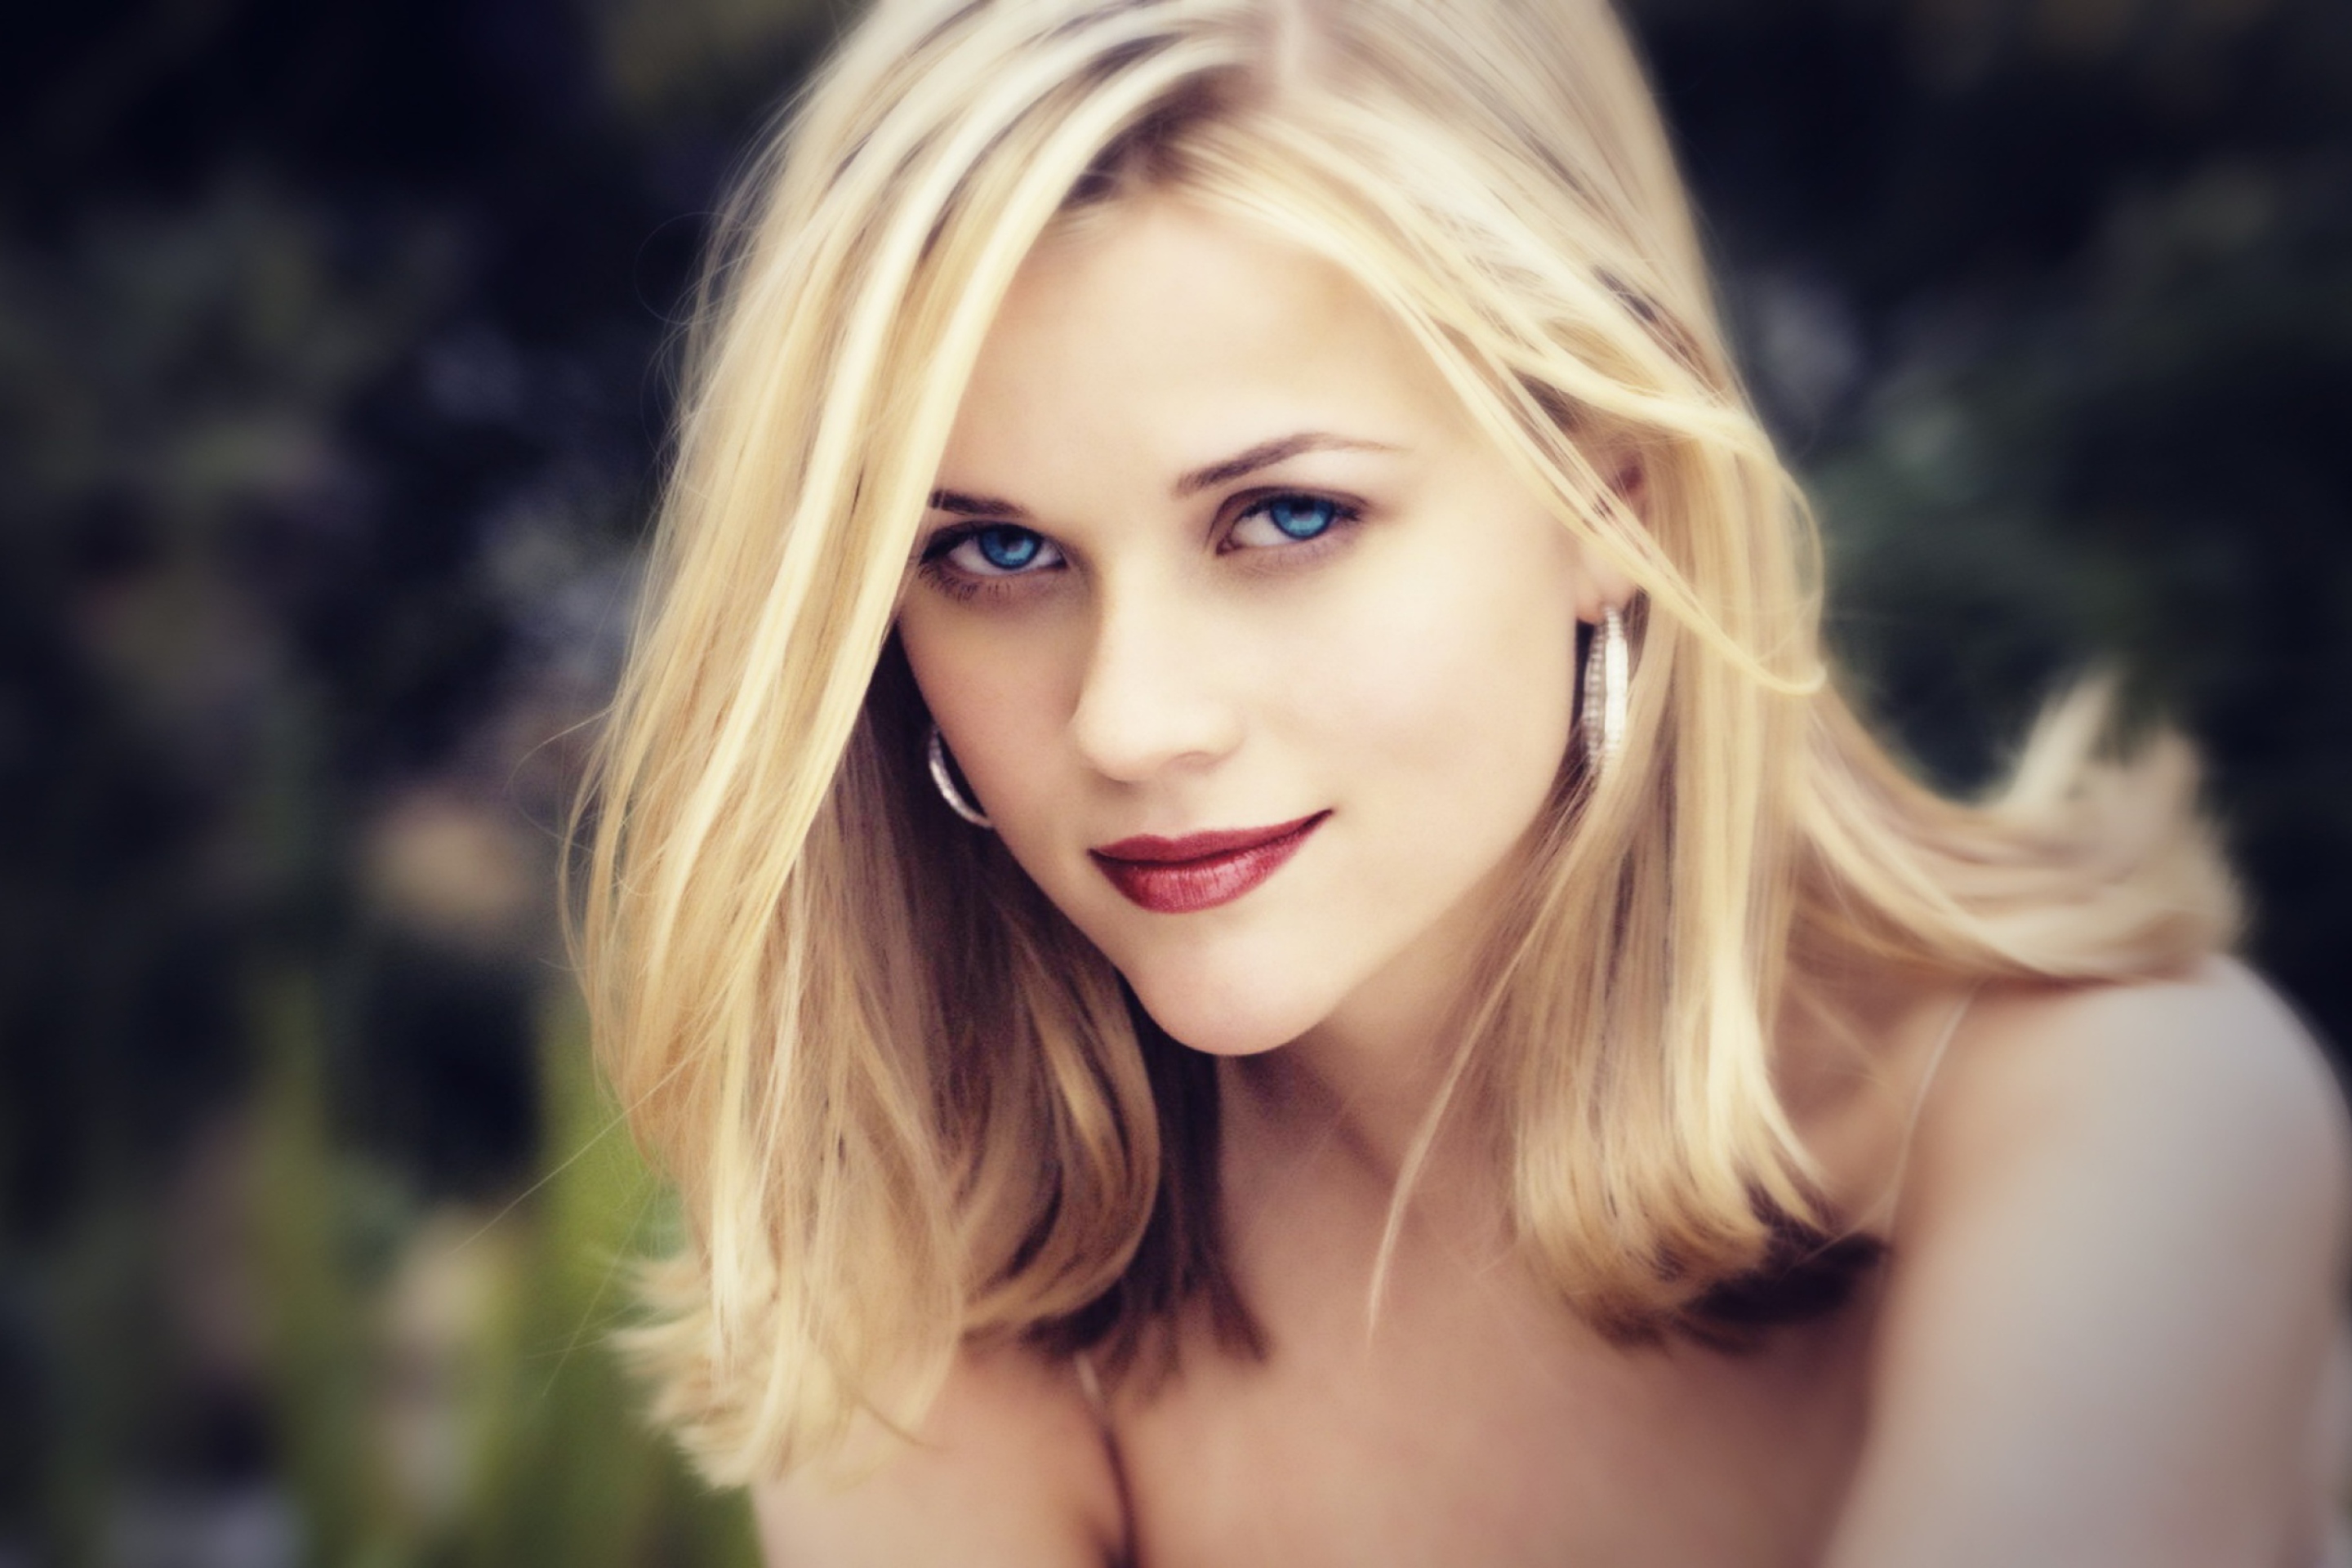 Das Reese Witherspoon Wallpaper 2880x1920